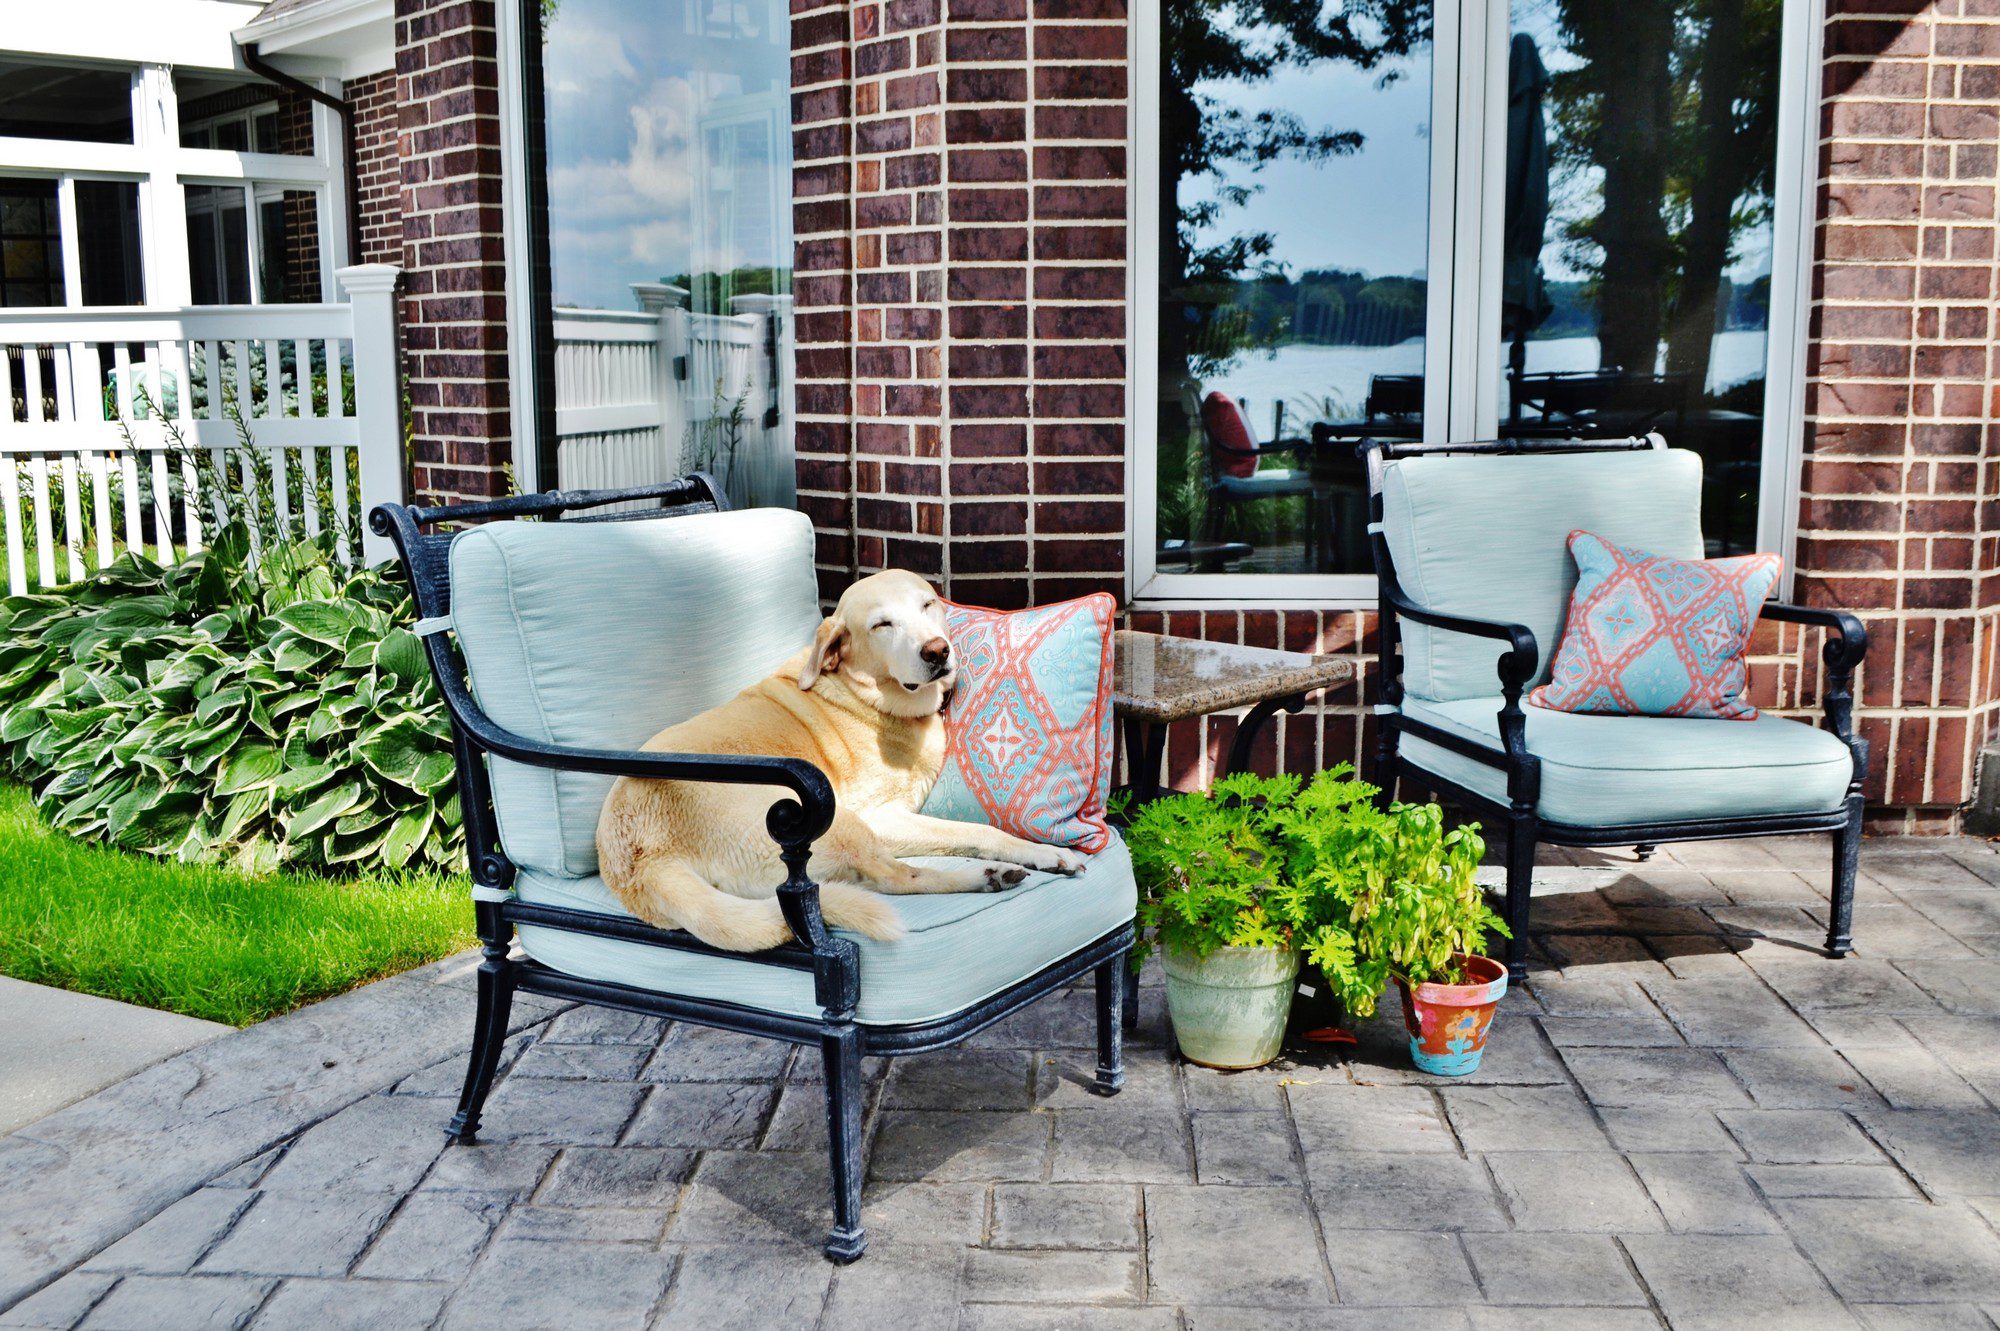 The image shows a comfortable and inviting outdoor sitting area by a brick house. There is a dog relaxing on one of the two cushioned patio chairs. Both chairs are black with light blue cushions and colorful patterned pillows. There's a variety of plants around the chairs, including some in pots on the ground and a bushy plant in the corner by the fence. The ground is covered with stone pavers, and in the background, through the house's glass doors, a body of water and greenery can be seen, suggesting that this house is located near a lake or a similar body of water. The scene is bathed in natural light, contributing to the tranquil and cosy atmosphere.